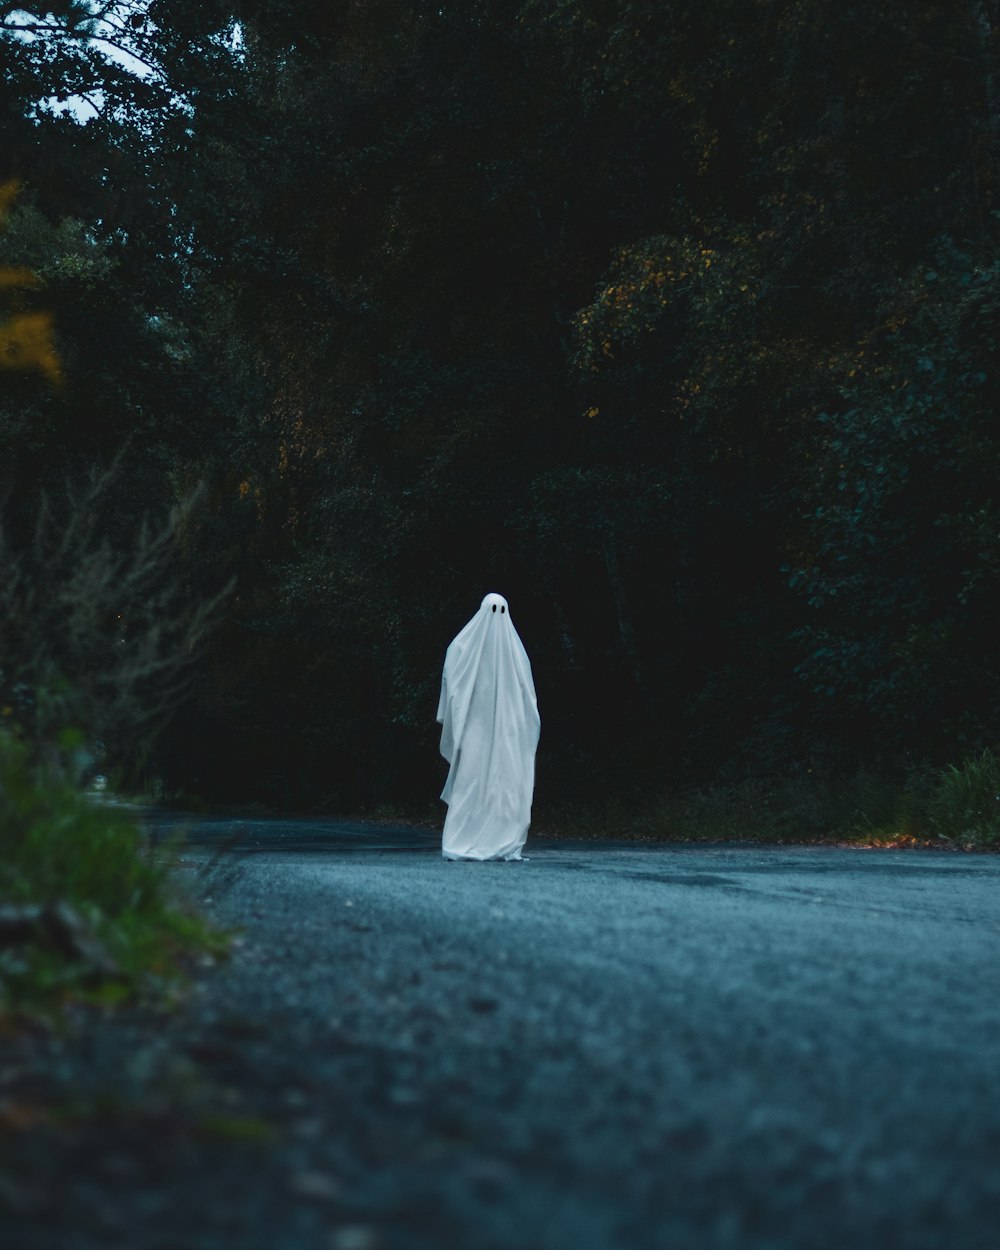 a ghost is walking down the road in the dark